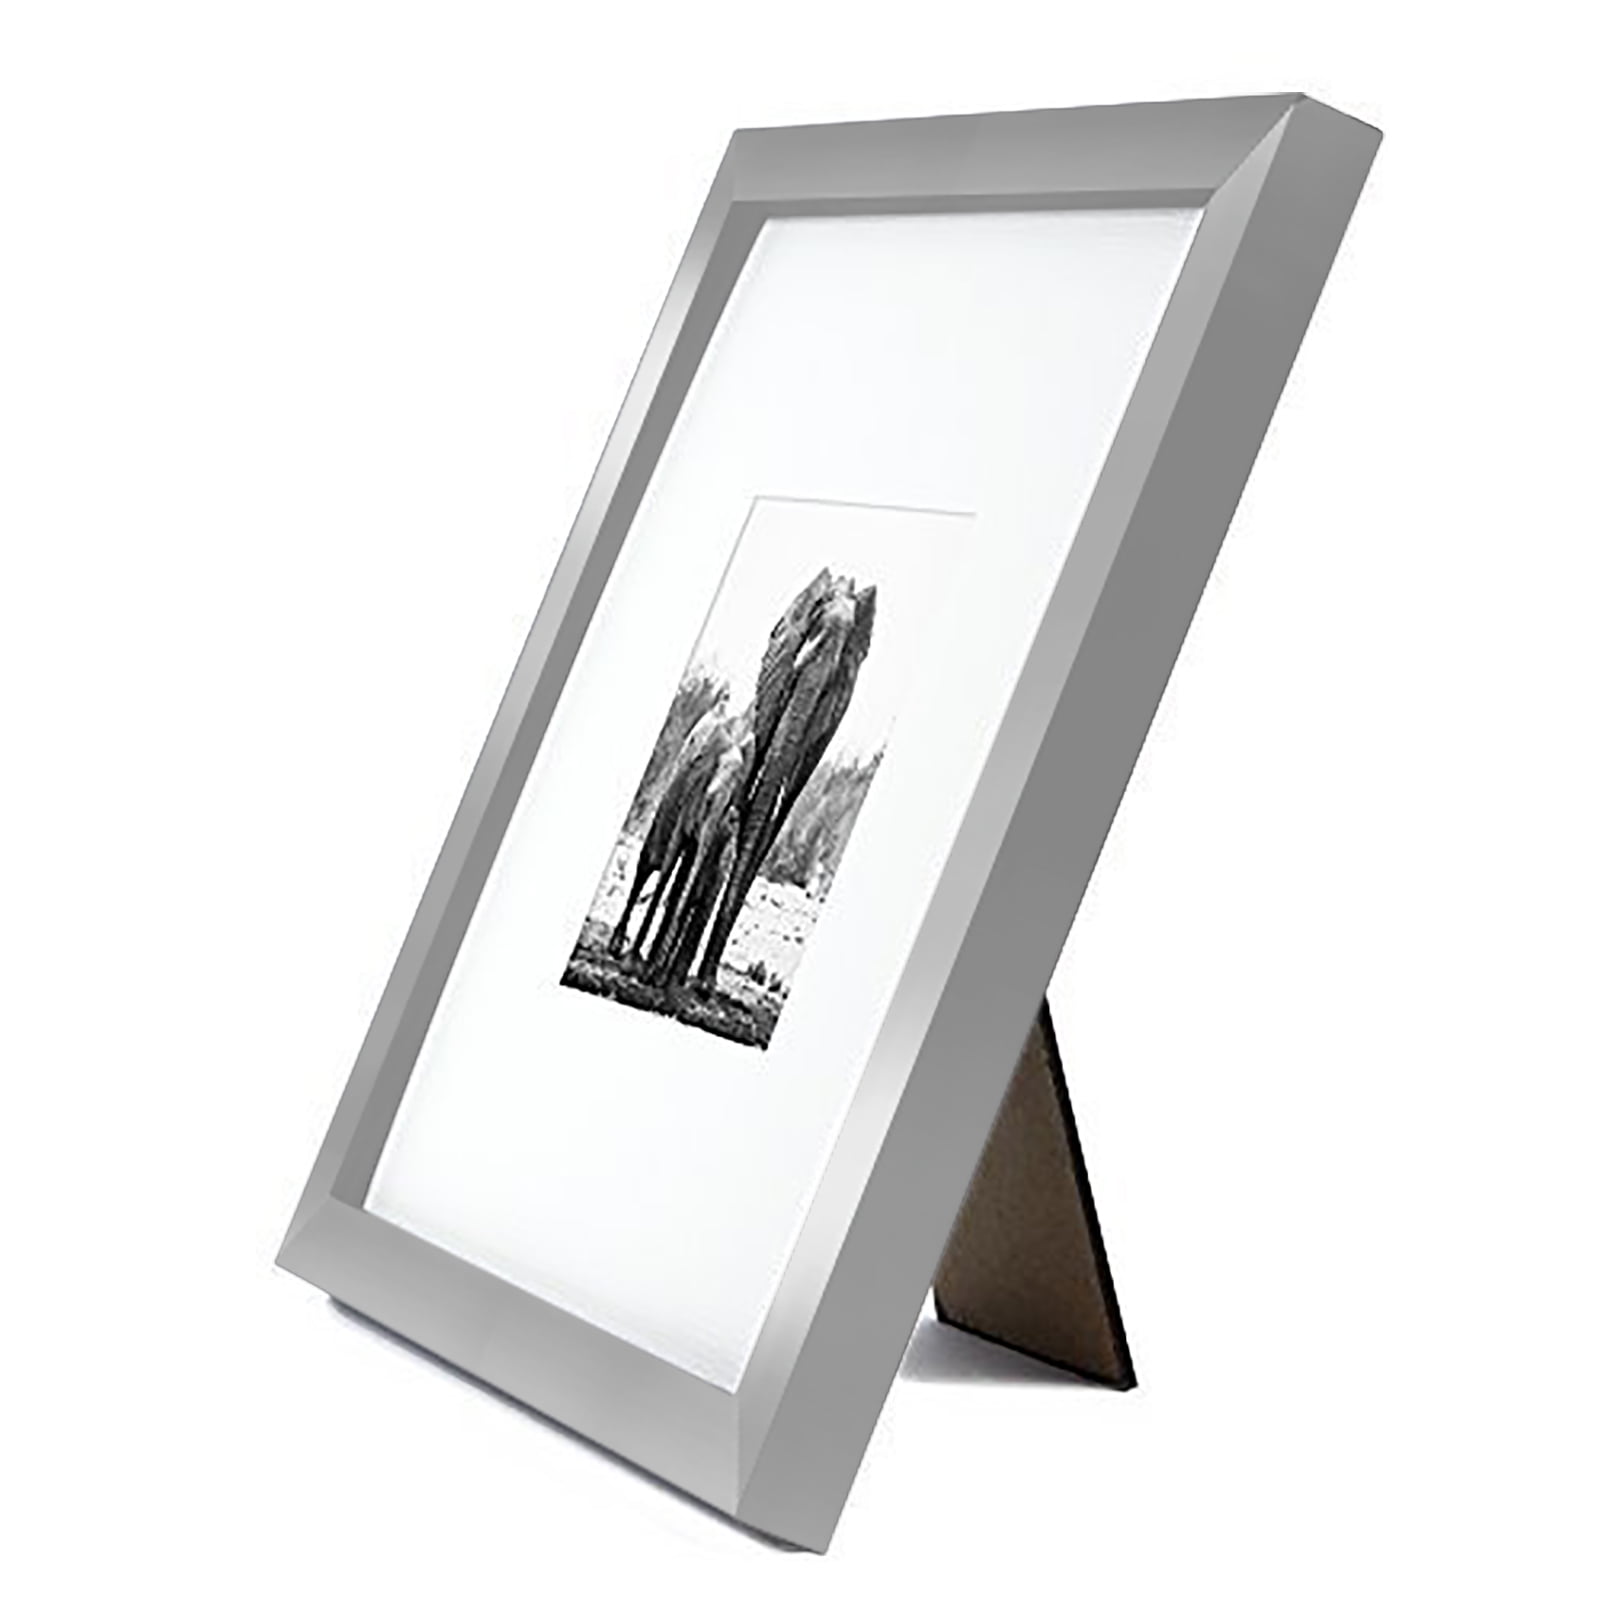  Mantello 12x12 Frame White Set of 6-12 x 12 Frame Square  Picture Frame, 8x8 Picture Frames with Mat- Thin Border 12x12 Picture Frame  Set- White Gallery Wall Frame Set